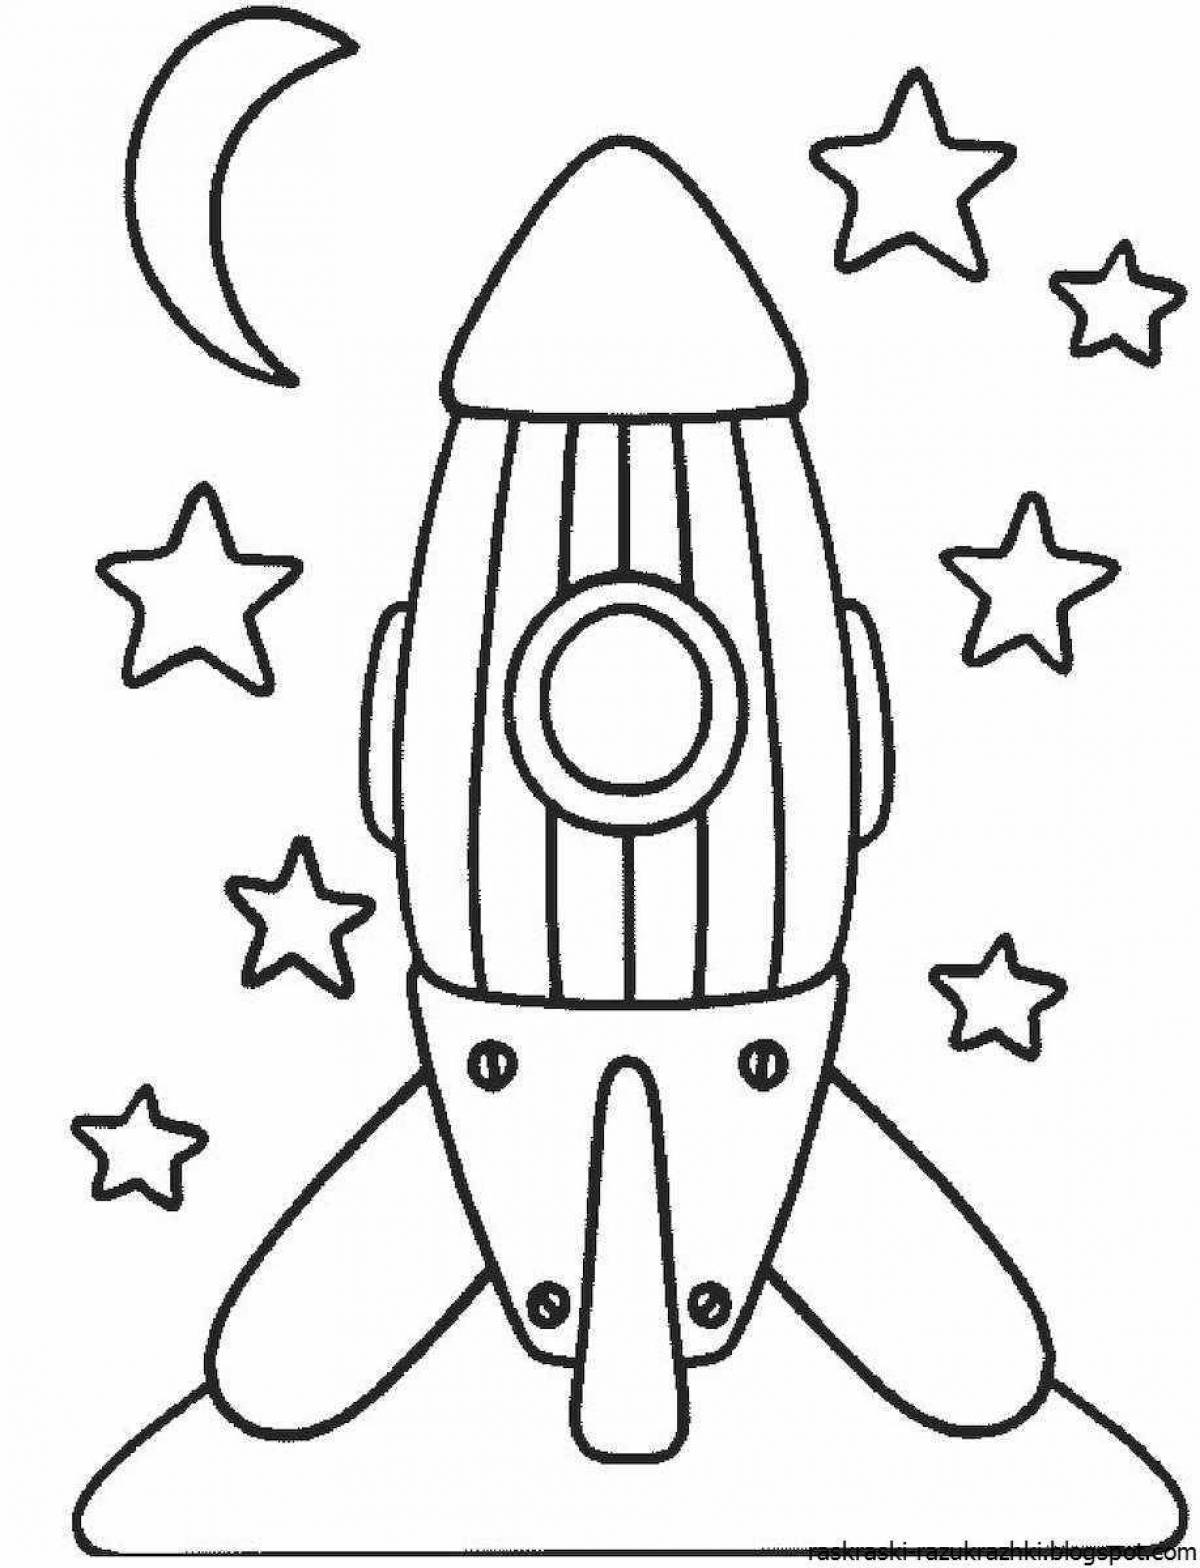 Cute rocket coloring book for 6-7 year olds